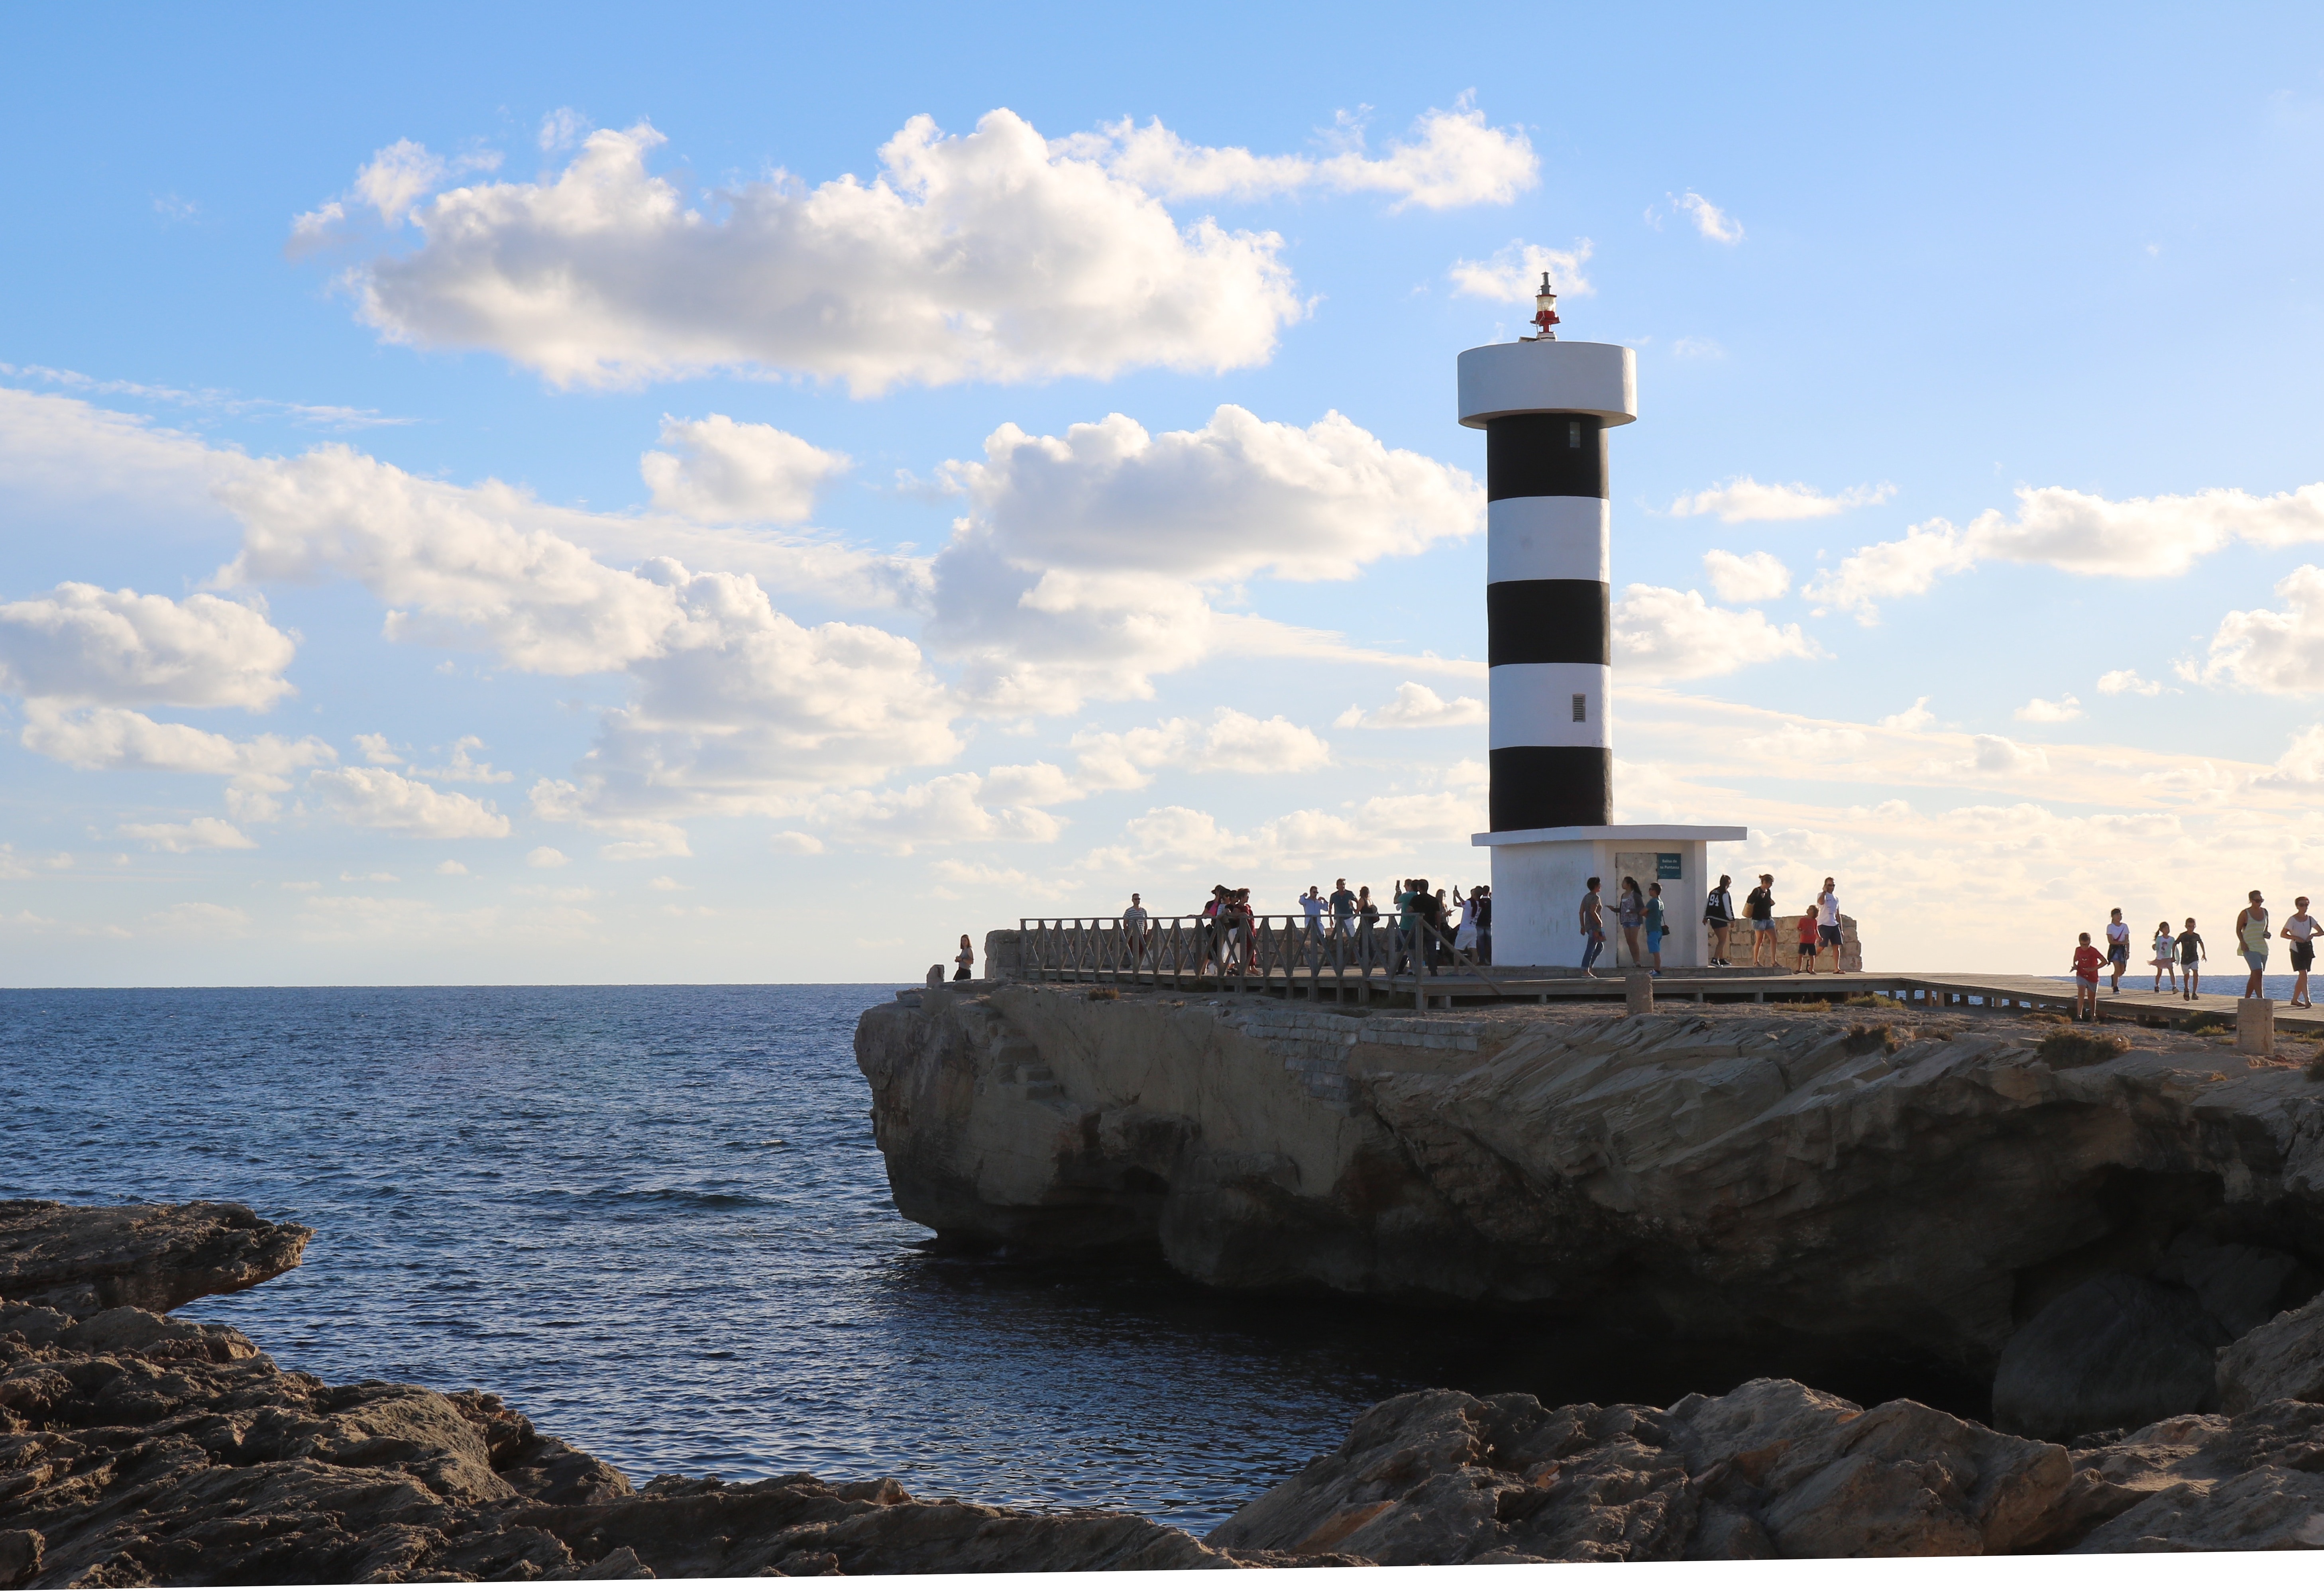 people near white and black concrete lighthouse near blue sea under blue and white cloudy sky during daytime